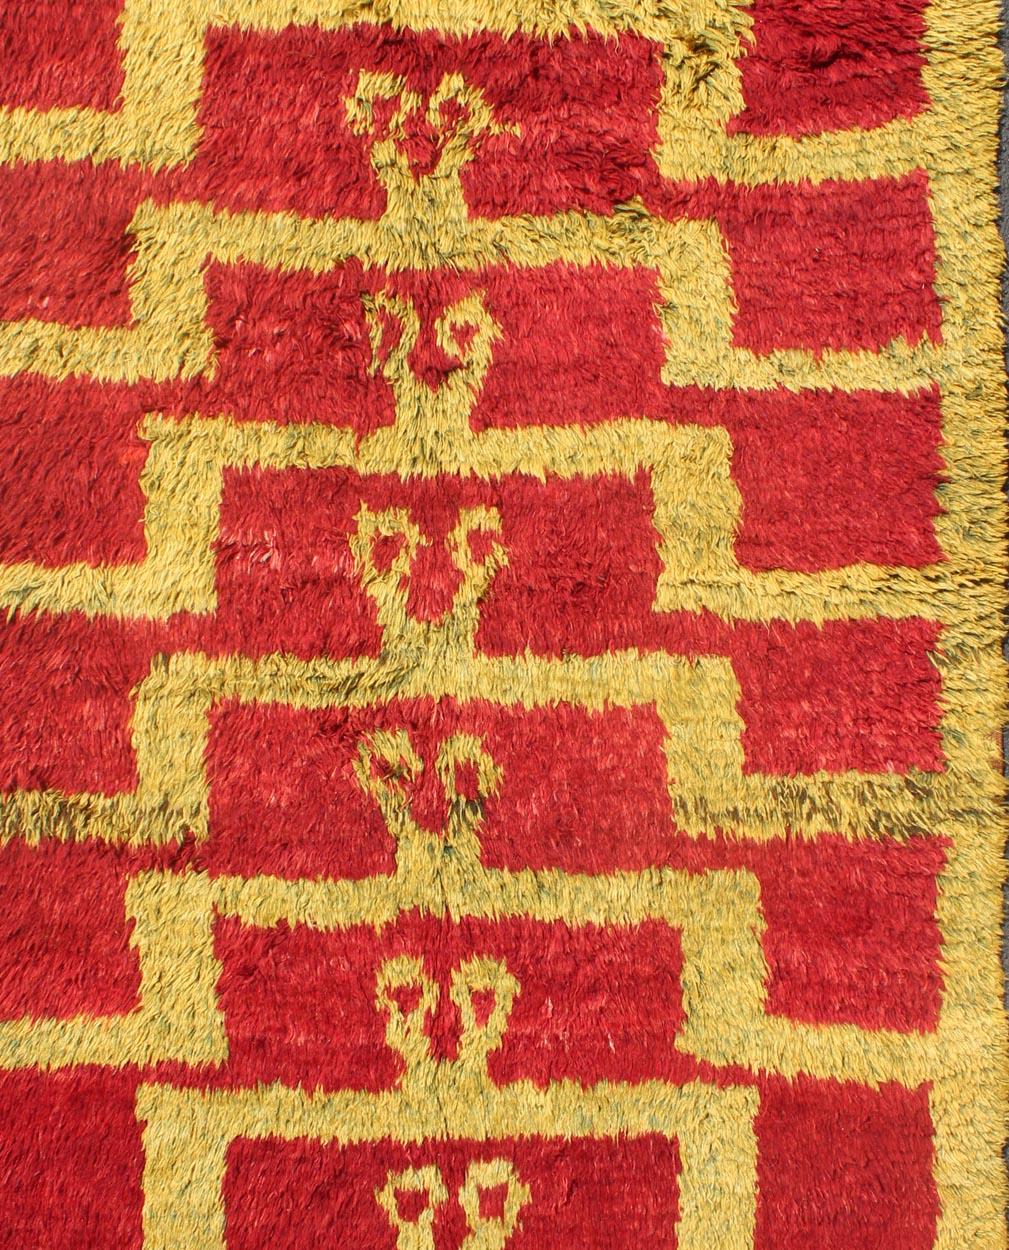 Made with fine wool and high pile, this vintage Tulu from mid-20th century Turkey boasts an interconnected Mid-Century Modern pattern. The multi-tiered pattern consists of greenish-gold outlines set on a red field. The contrast of color adds a